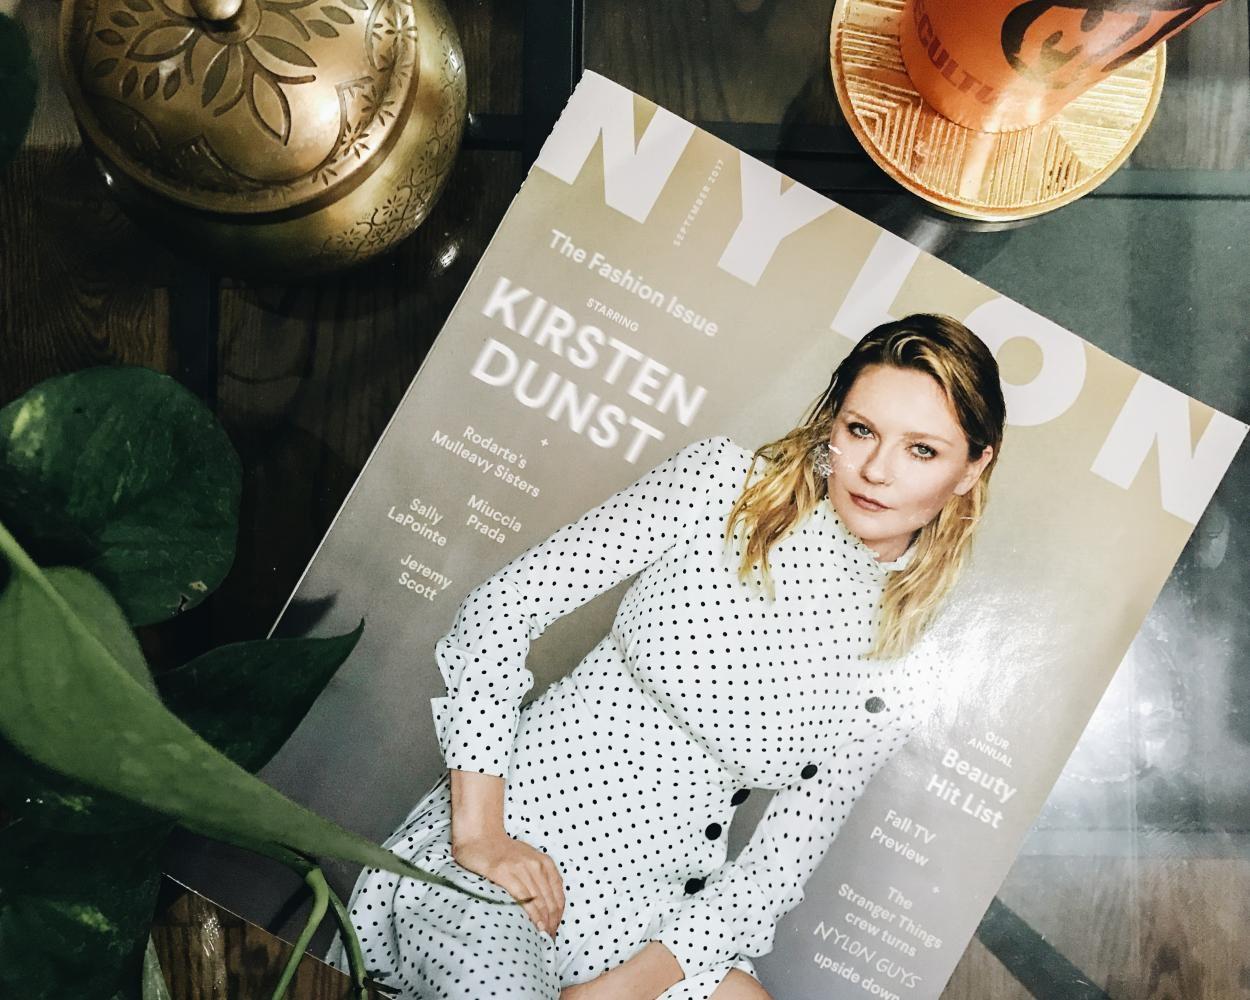 Nylon Magazines October print issue will be its last due to declining profits. The magazine will be shifting its focus towards digital media production.